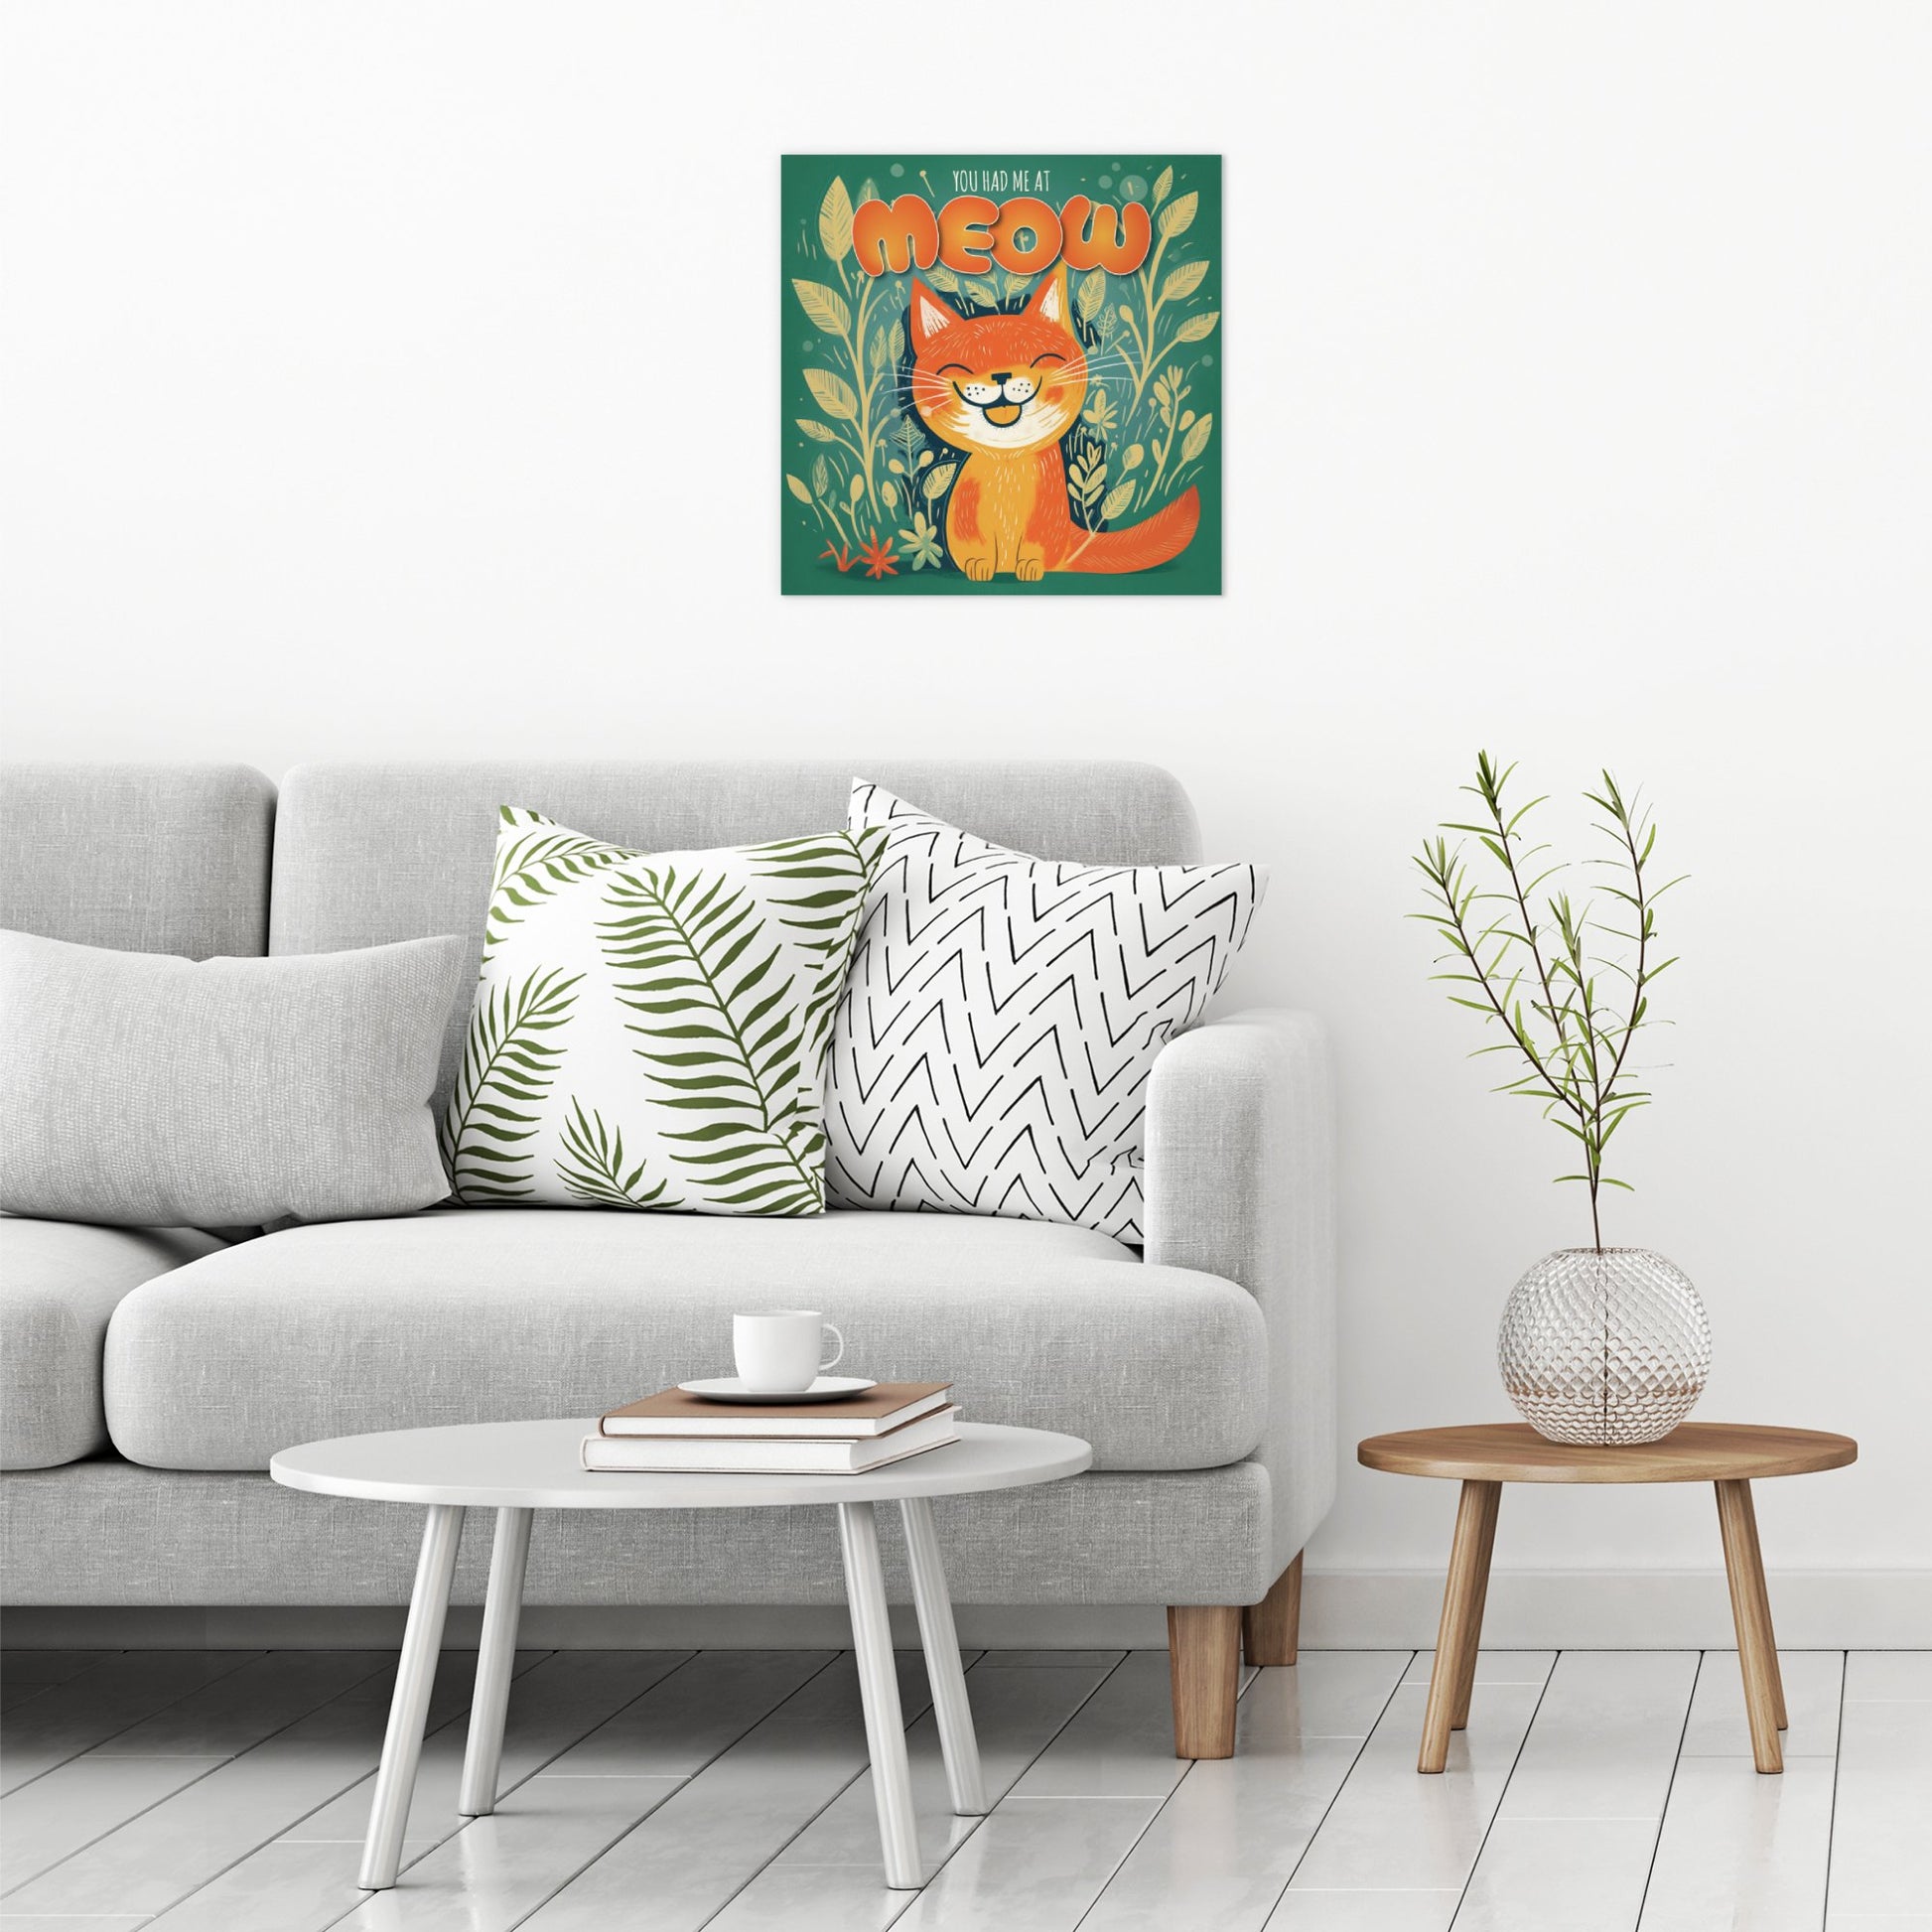 A contemporary modern room view showing a large size metal art poster display plate with printed design of a You Had Me At Meow - Cute Cat Quote